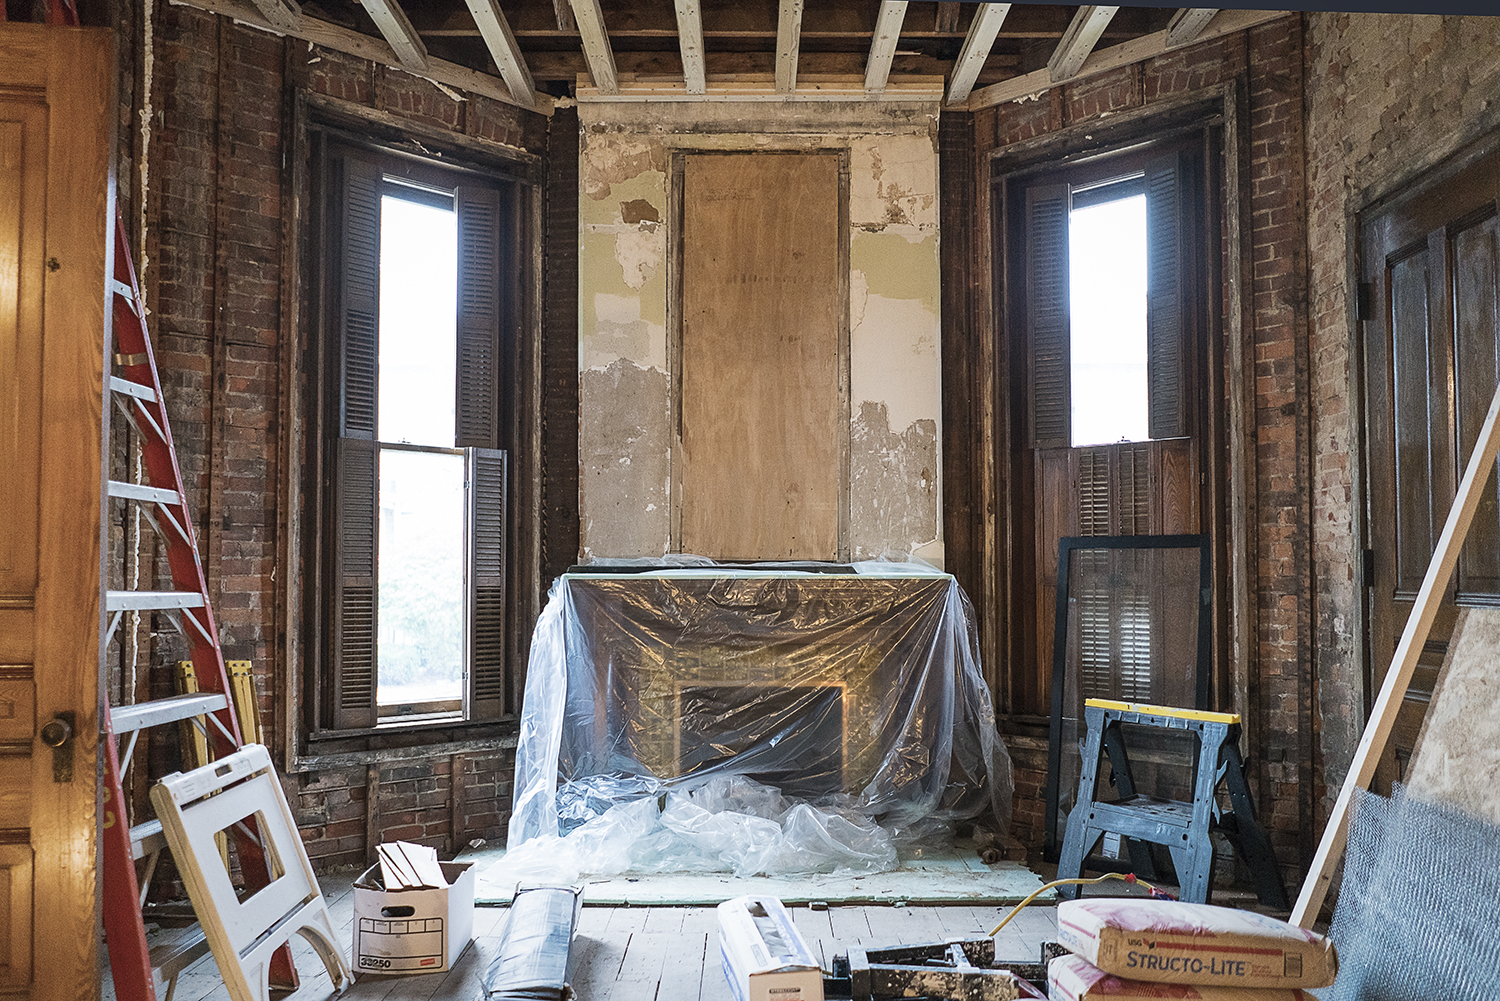 Flint, MI - Tuesday, October 31, 2017: Construction materials sit in the music room of the Whaley Historic House Museum, in preparation of the house's full restoration.